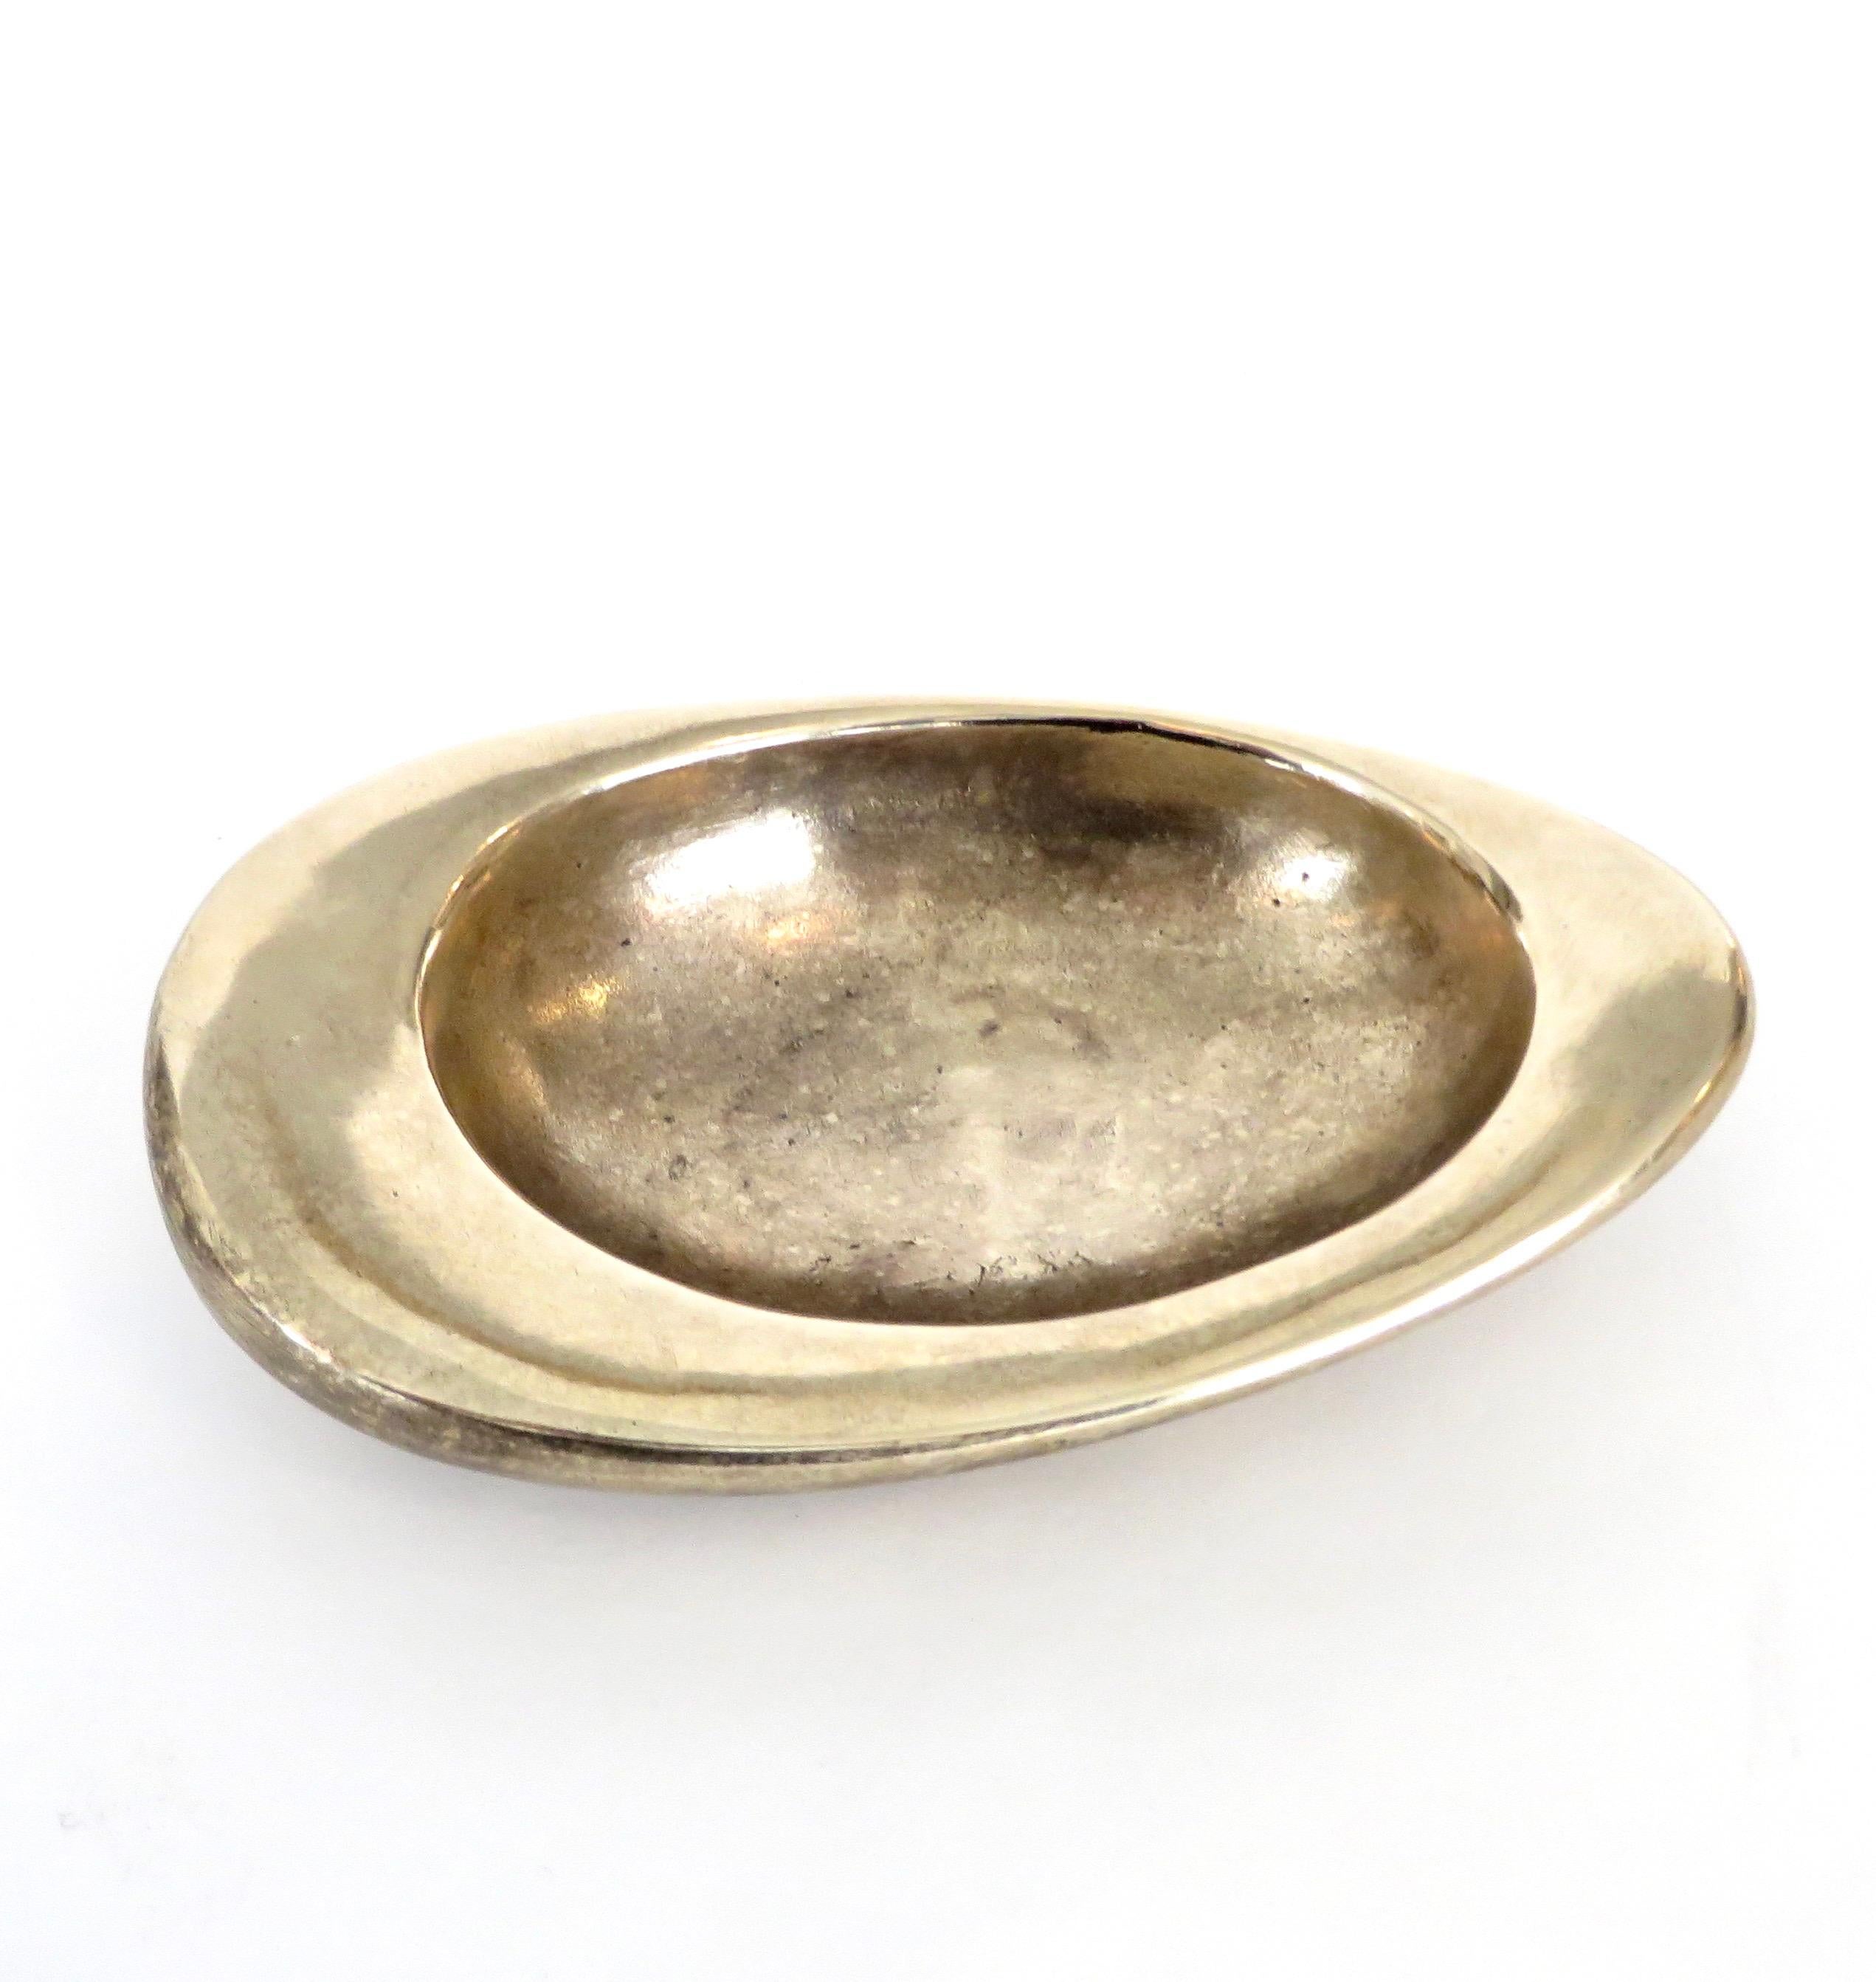 Bronze elongated oval bowl, vide poche or coupe by French artist and designer Monique Gerber.
Monique Gerber was a French artist working in bronze creating objects for various other artists and companies such as Elsa Schiaparelli and Claude du